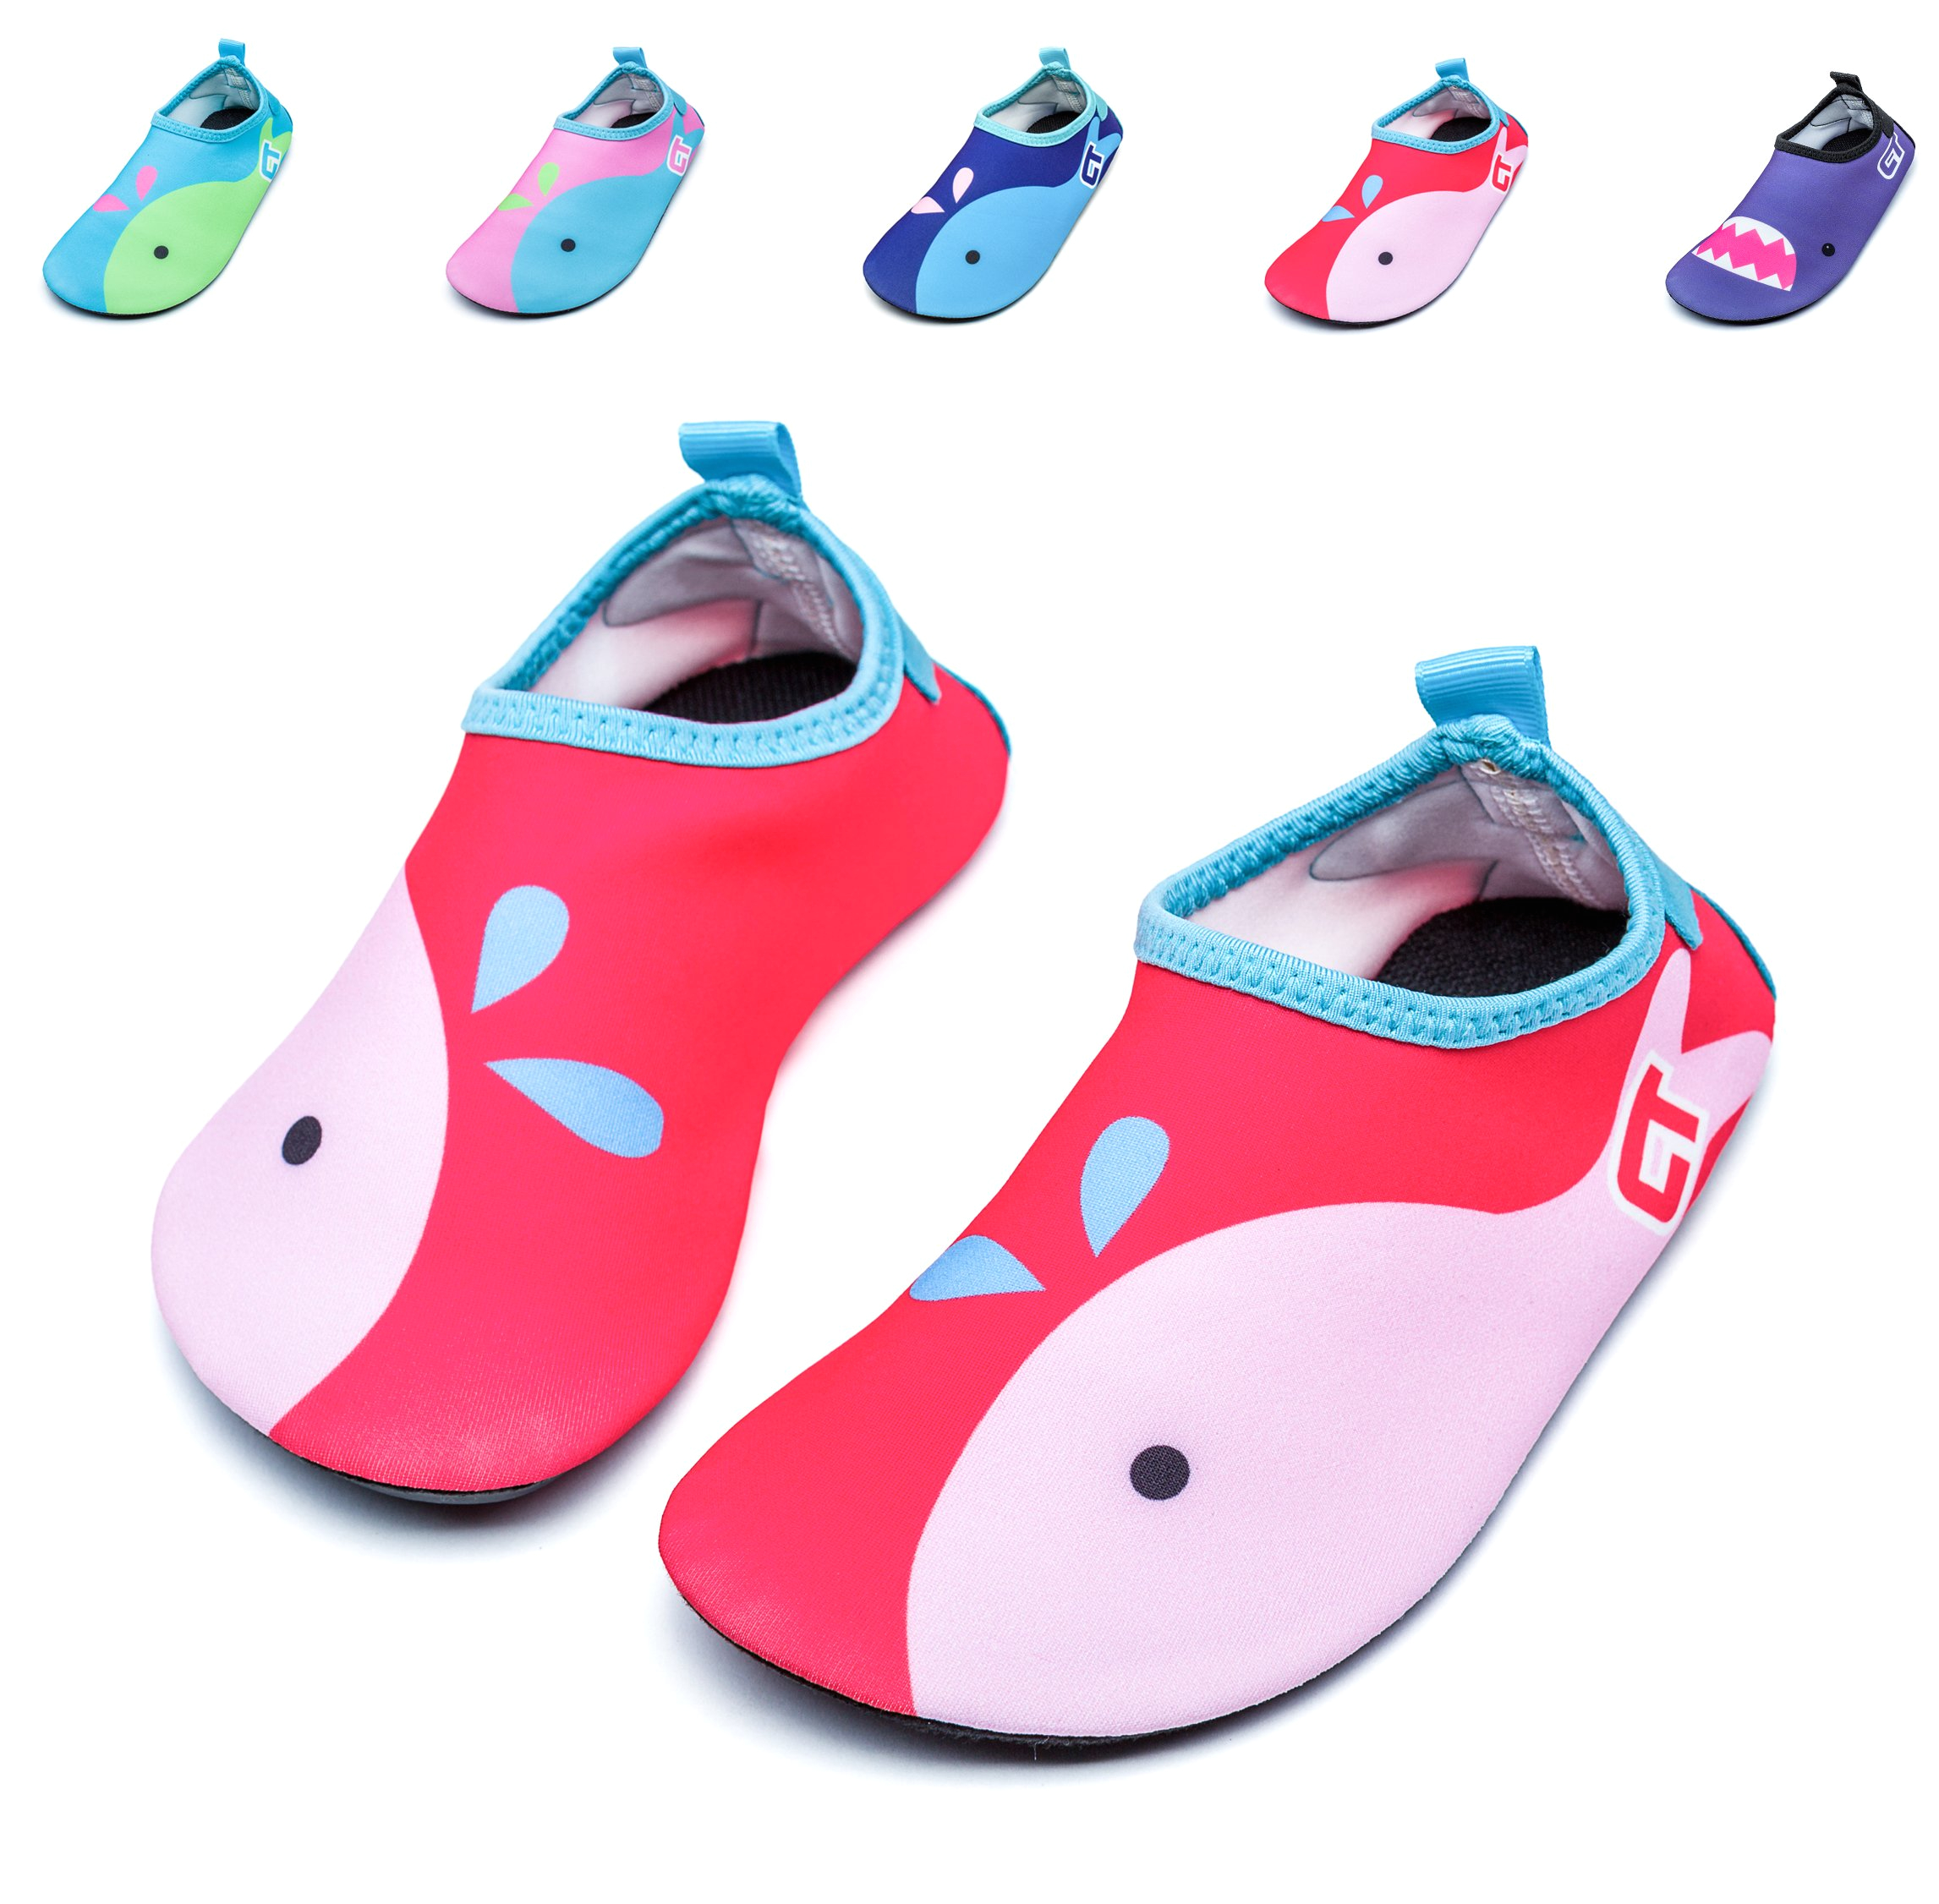 Baby Bath Seat Boots Amazon Baby Inflatable Pool Float toy Infant